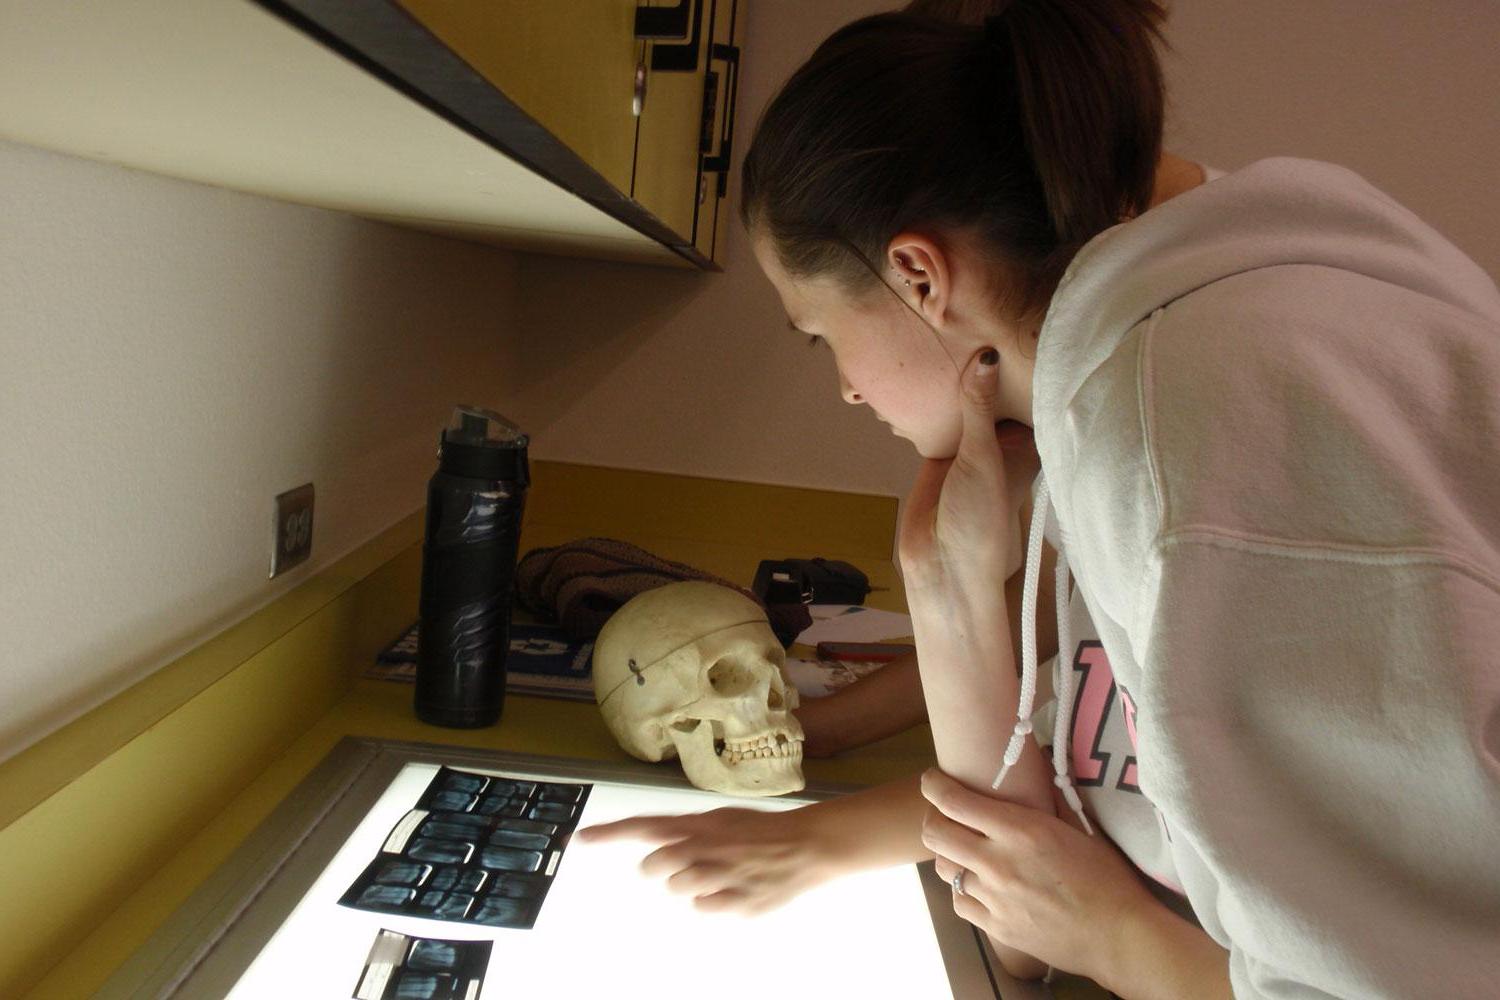 Forensic Anthropology student Nicole Arizmendi identifies a human skeleton by matching it to it's dental records.